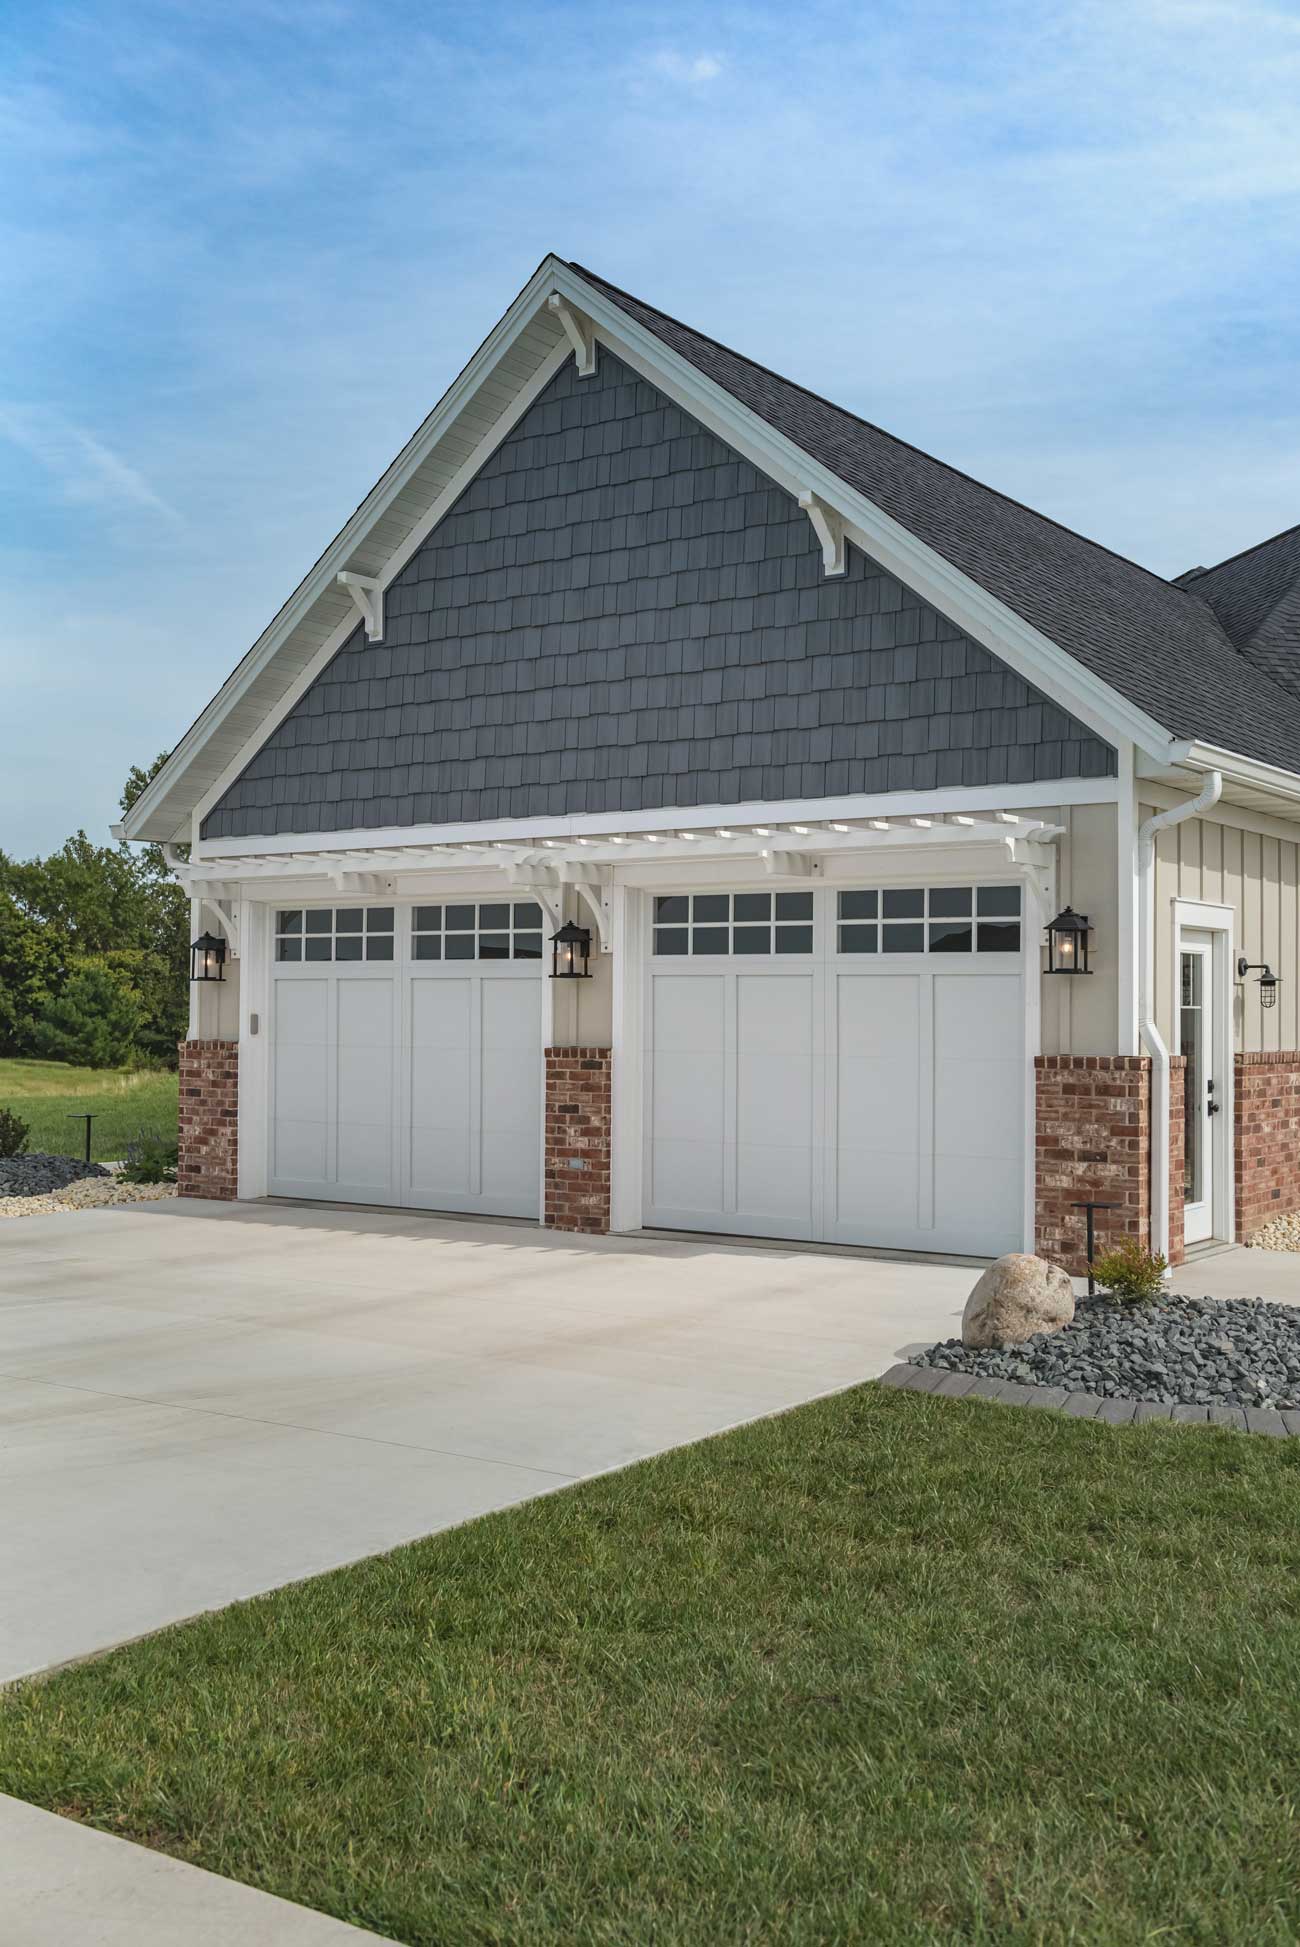 This is an image of a Wood garage door overlayed on a steel garage door with a carriage house style look.